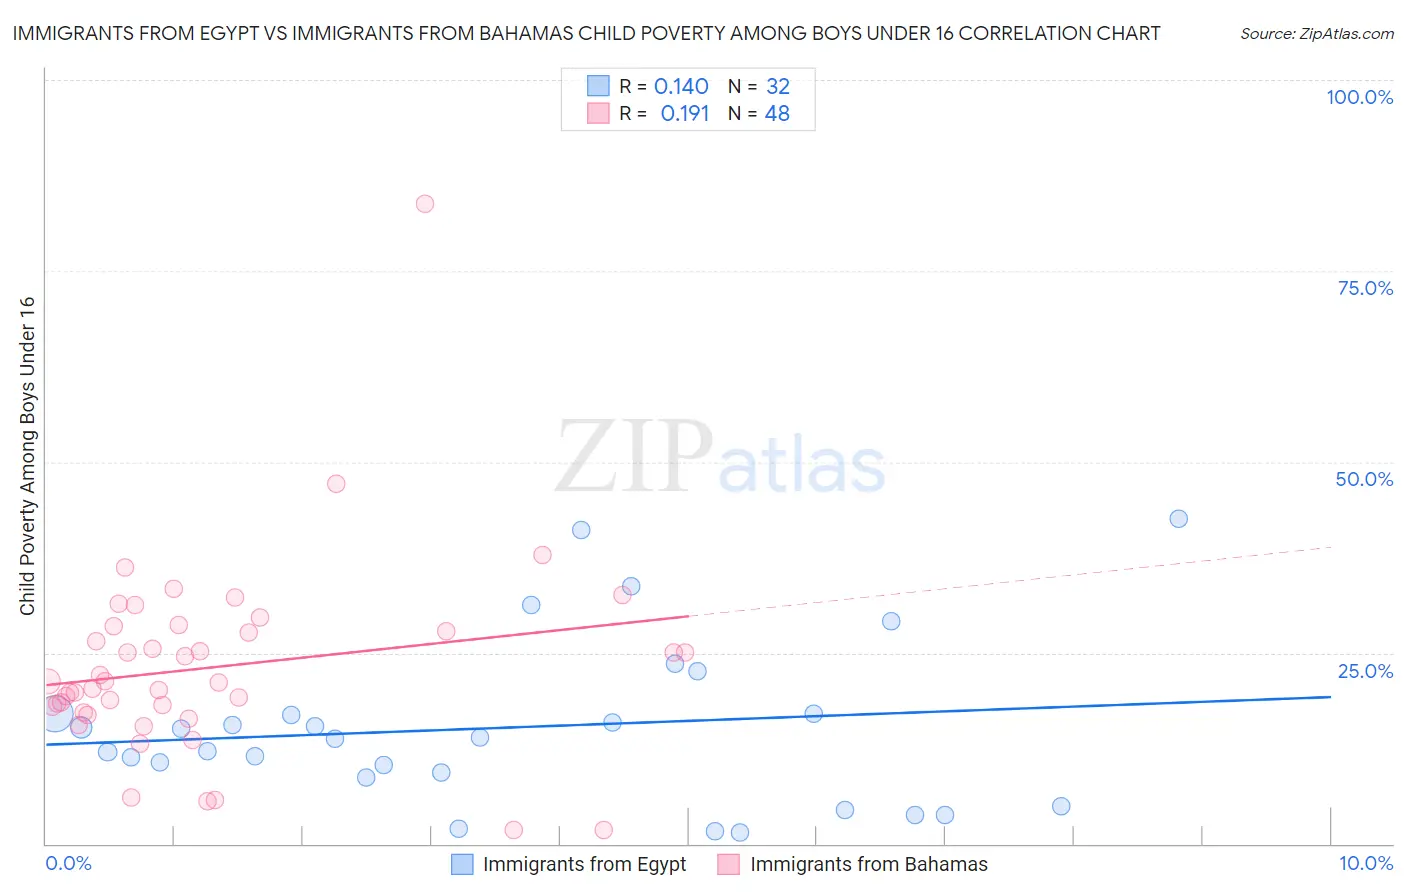 Immigrants from Egypt vs Immigrants from Bahamas Child Poverty Among Boys Under 16